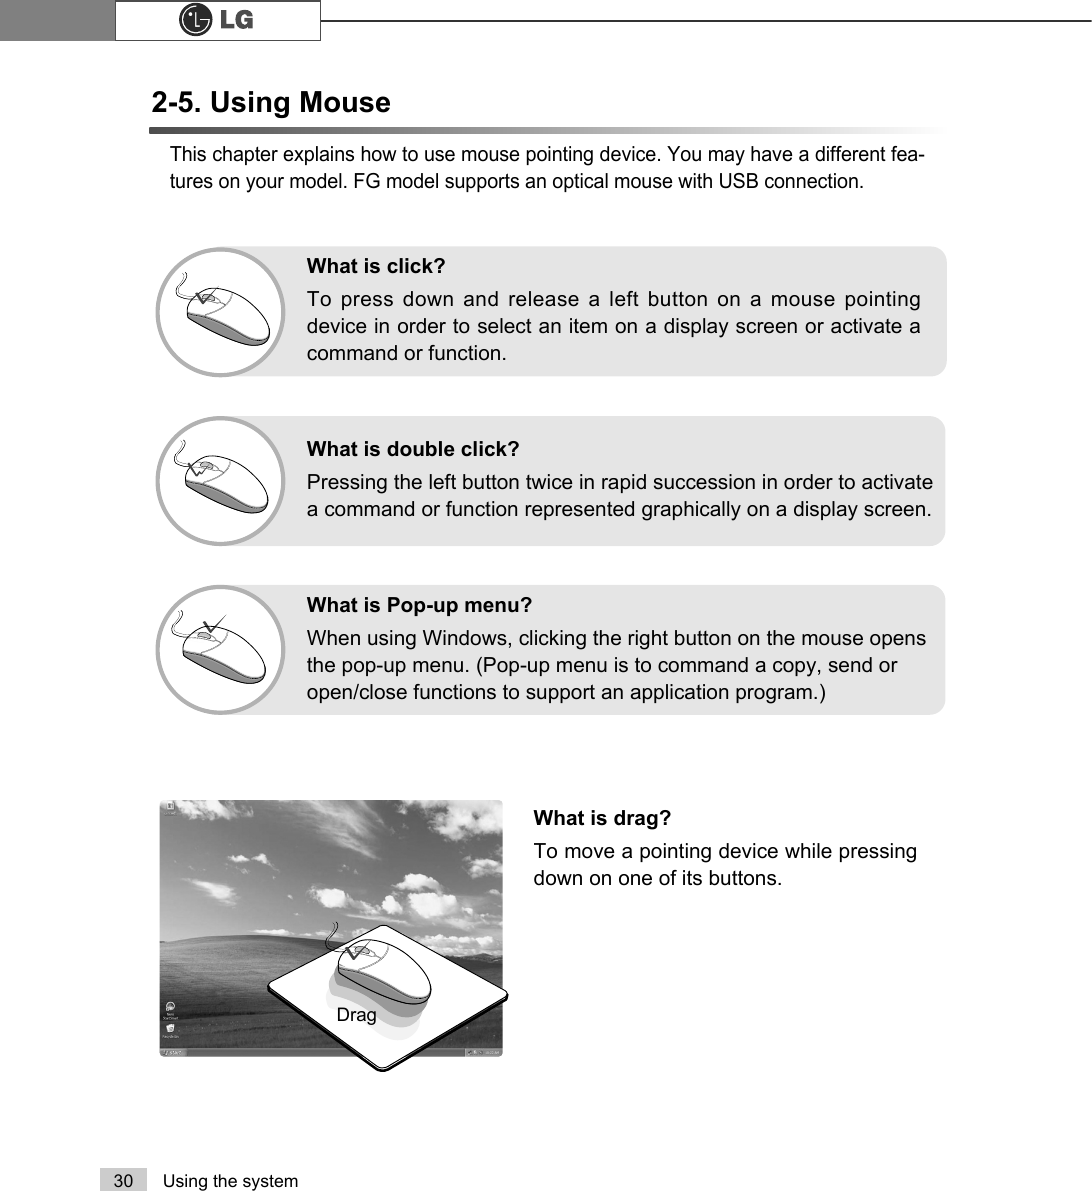 30 Using the systemThis chapter explains how to use mouse pointing device. You may have a different fea-tures on your model. FG model supports an optical mouse with USB connection.What is drag?To move a pointing device while pressingdown on one of its buttons.DragWhat is double click? Pressing the left button twice in rapid succession in order to activatea command or function represented graphically on a display screen.What is Pop-up menu?When using Windows, clicking the right button on the mouse opensthe pop-up menu. (Pop-up menu is to command a copy, send oropen/close functions to support an application program.)What is click?To press down and release a left button on a mouse pointingdevice in order to select an item on a display screen or activate acommand or function.2-5. Using Mouse